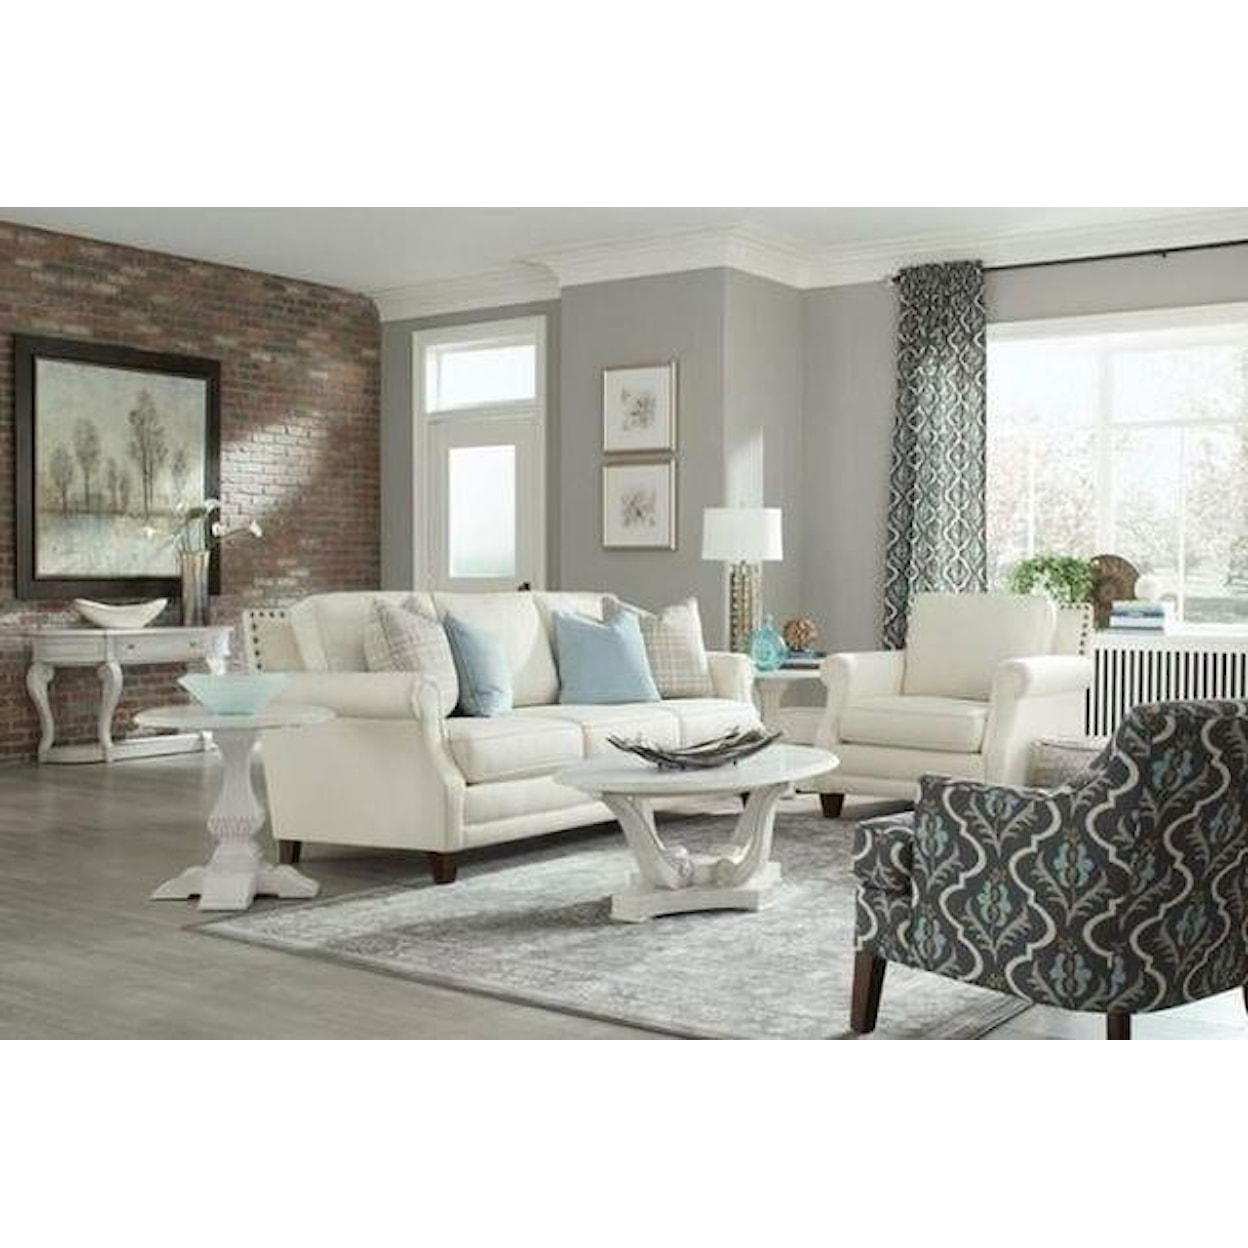 Trisha Yearwood Home Collection by Legacy Classic Jasper County Sofa Table